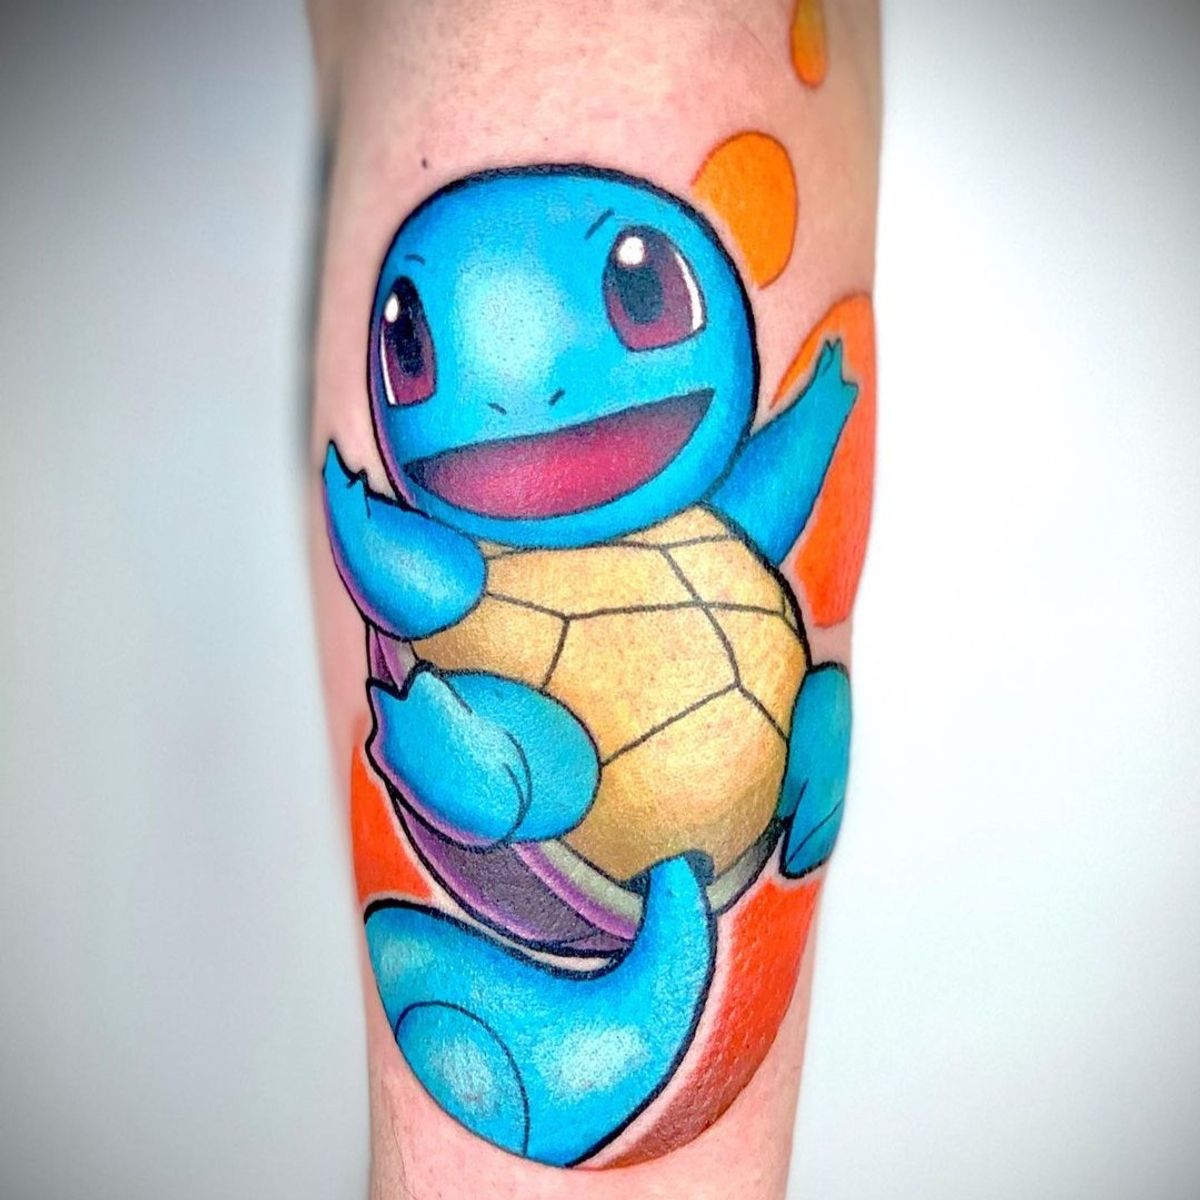 Tattoo uploaded by Justine Morrow • Squirtle tattoo by Chris Morris # ...